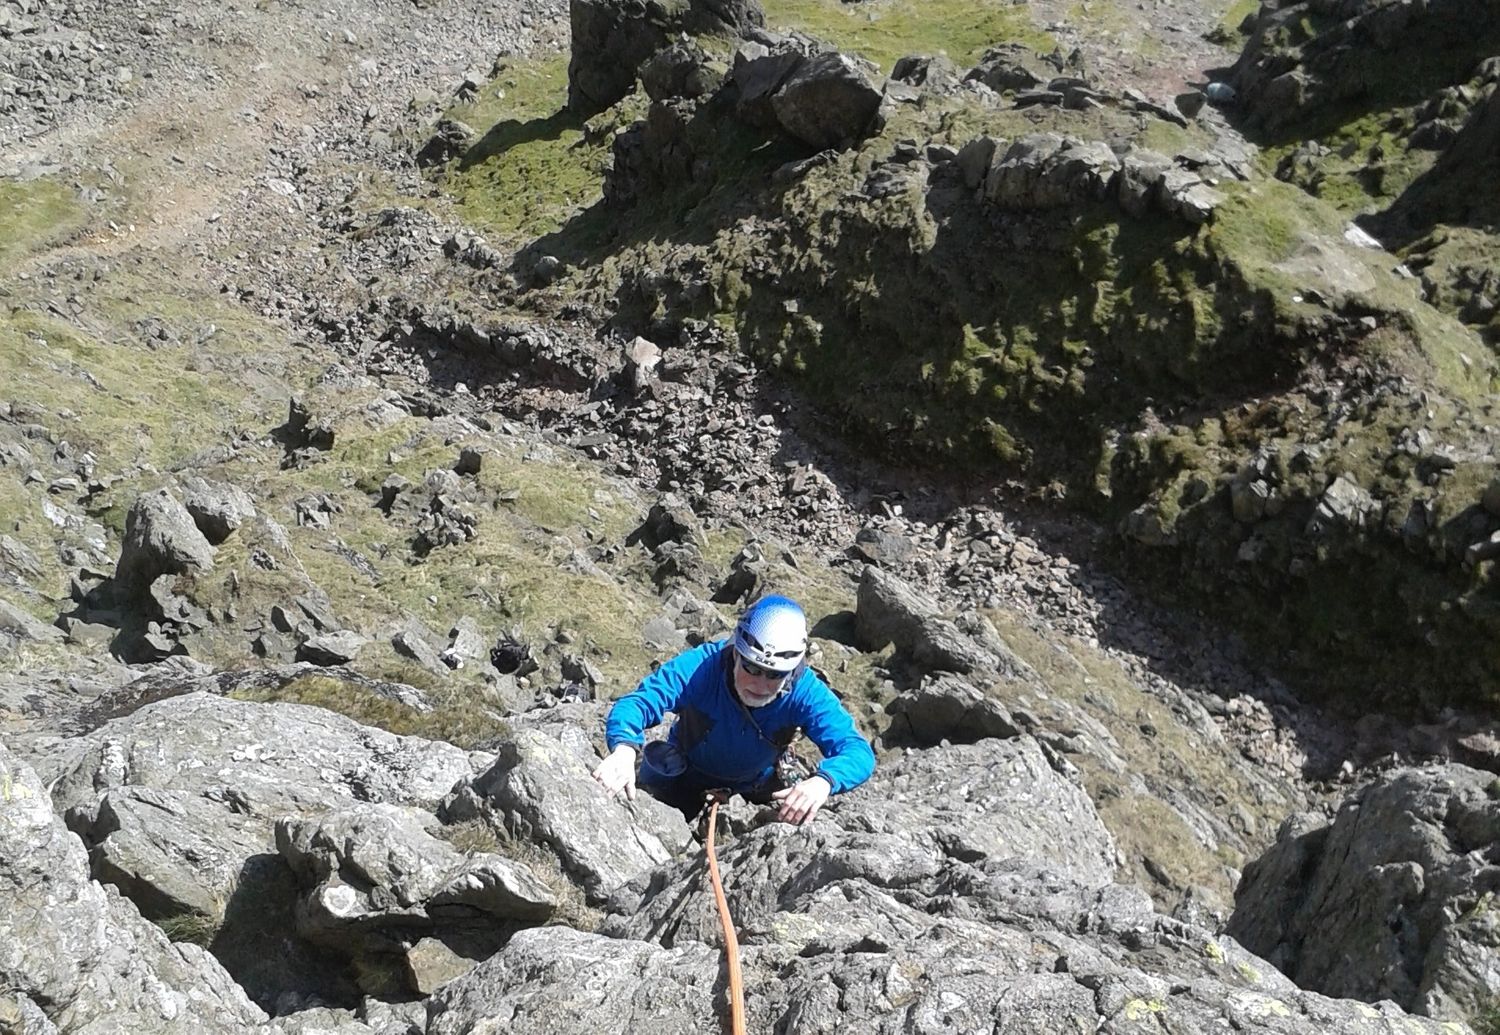  A client on a multi pitch climb in the Lake District - Chris Ensoll Mountain Guide 